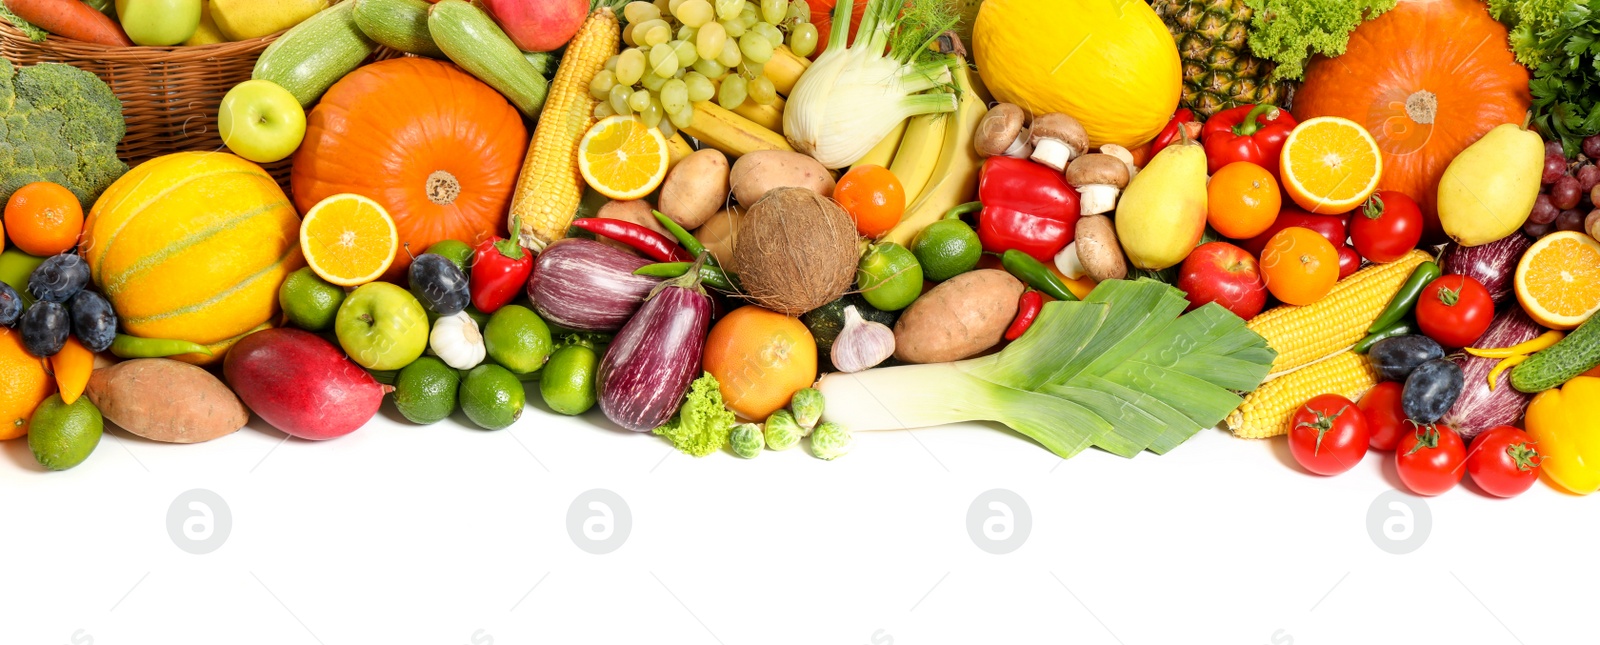 Photo of Assortment of fresh organic fruits and vegetables on white background, top view. Banner design